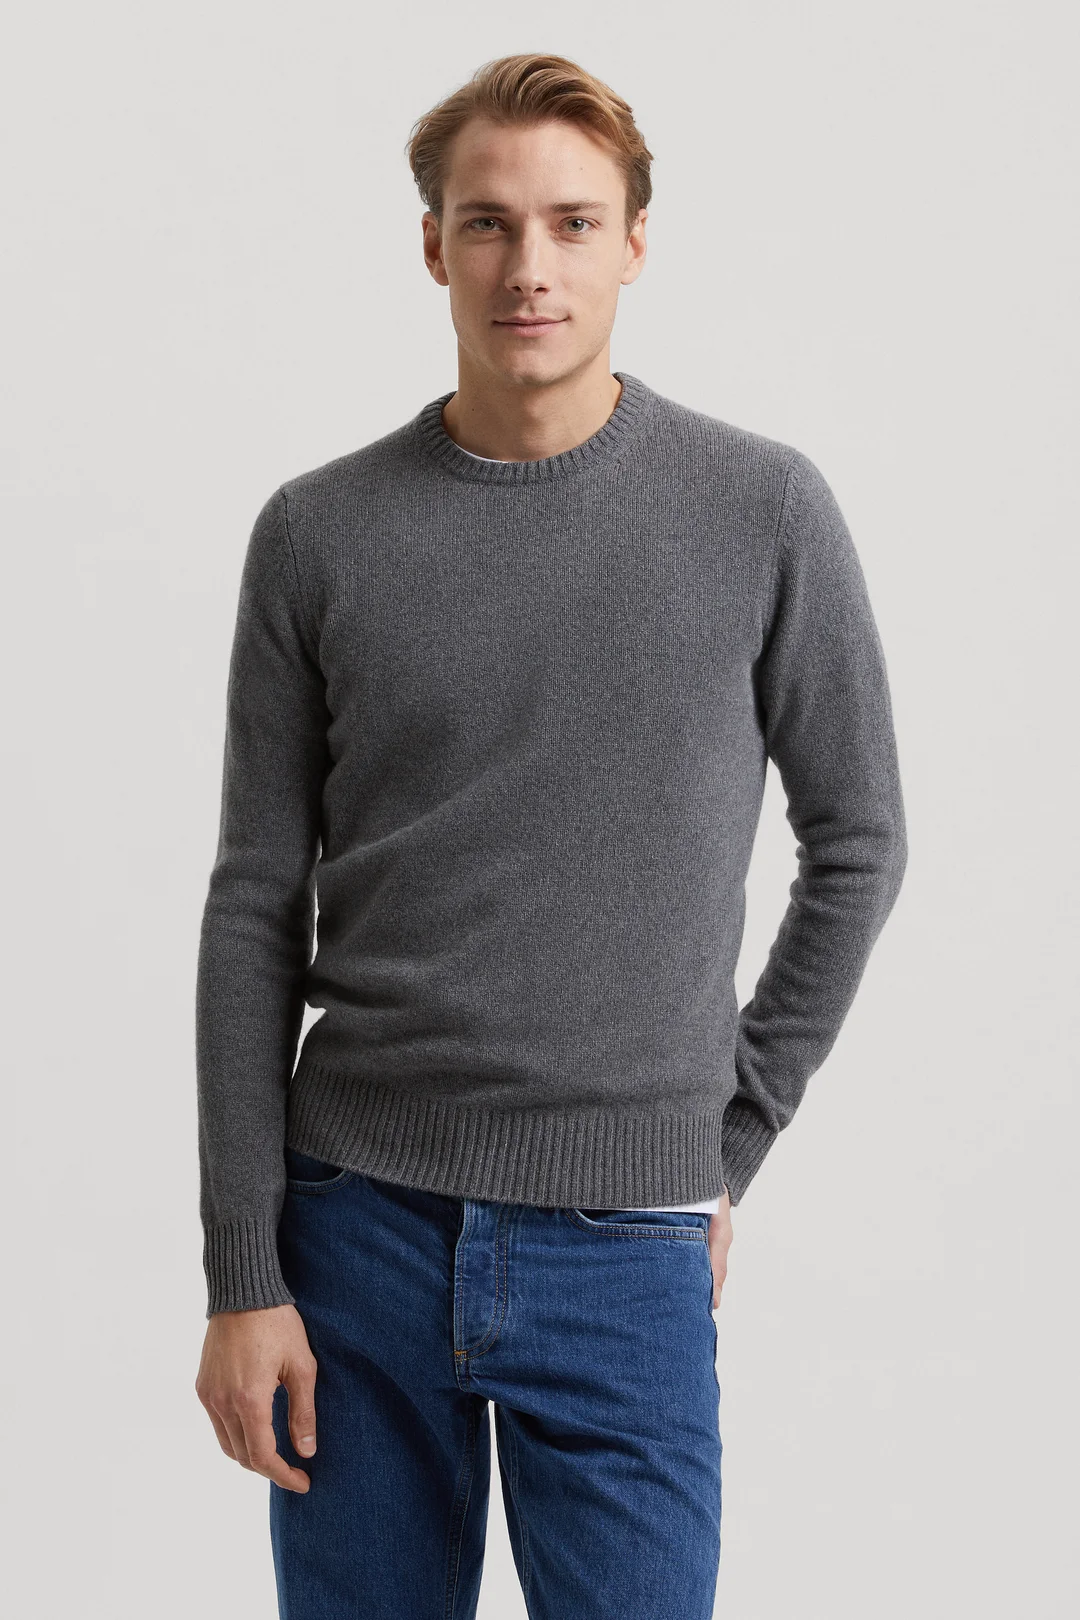 Dark Grey Cashmere Sweater | 100% Recycled Cashmere - ASKET